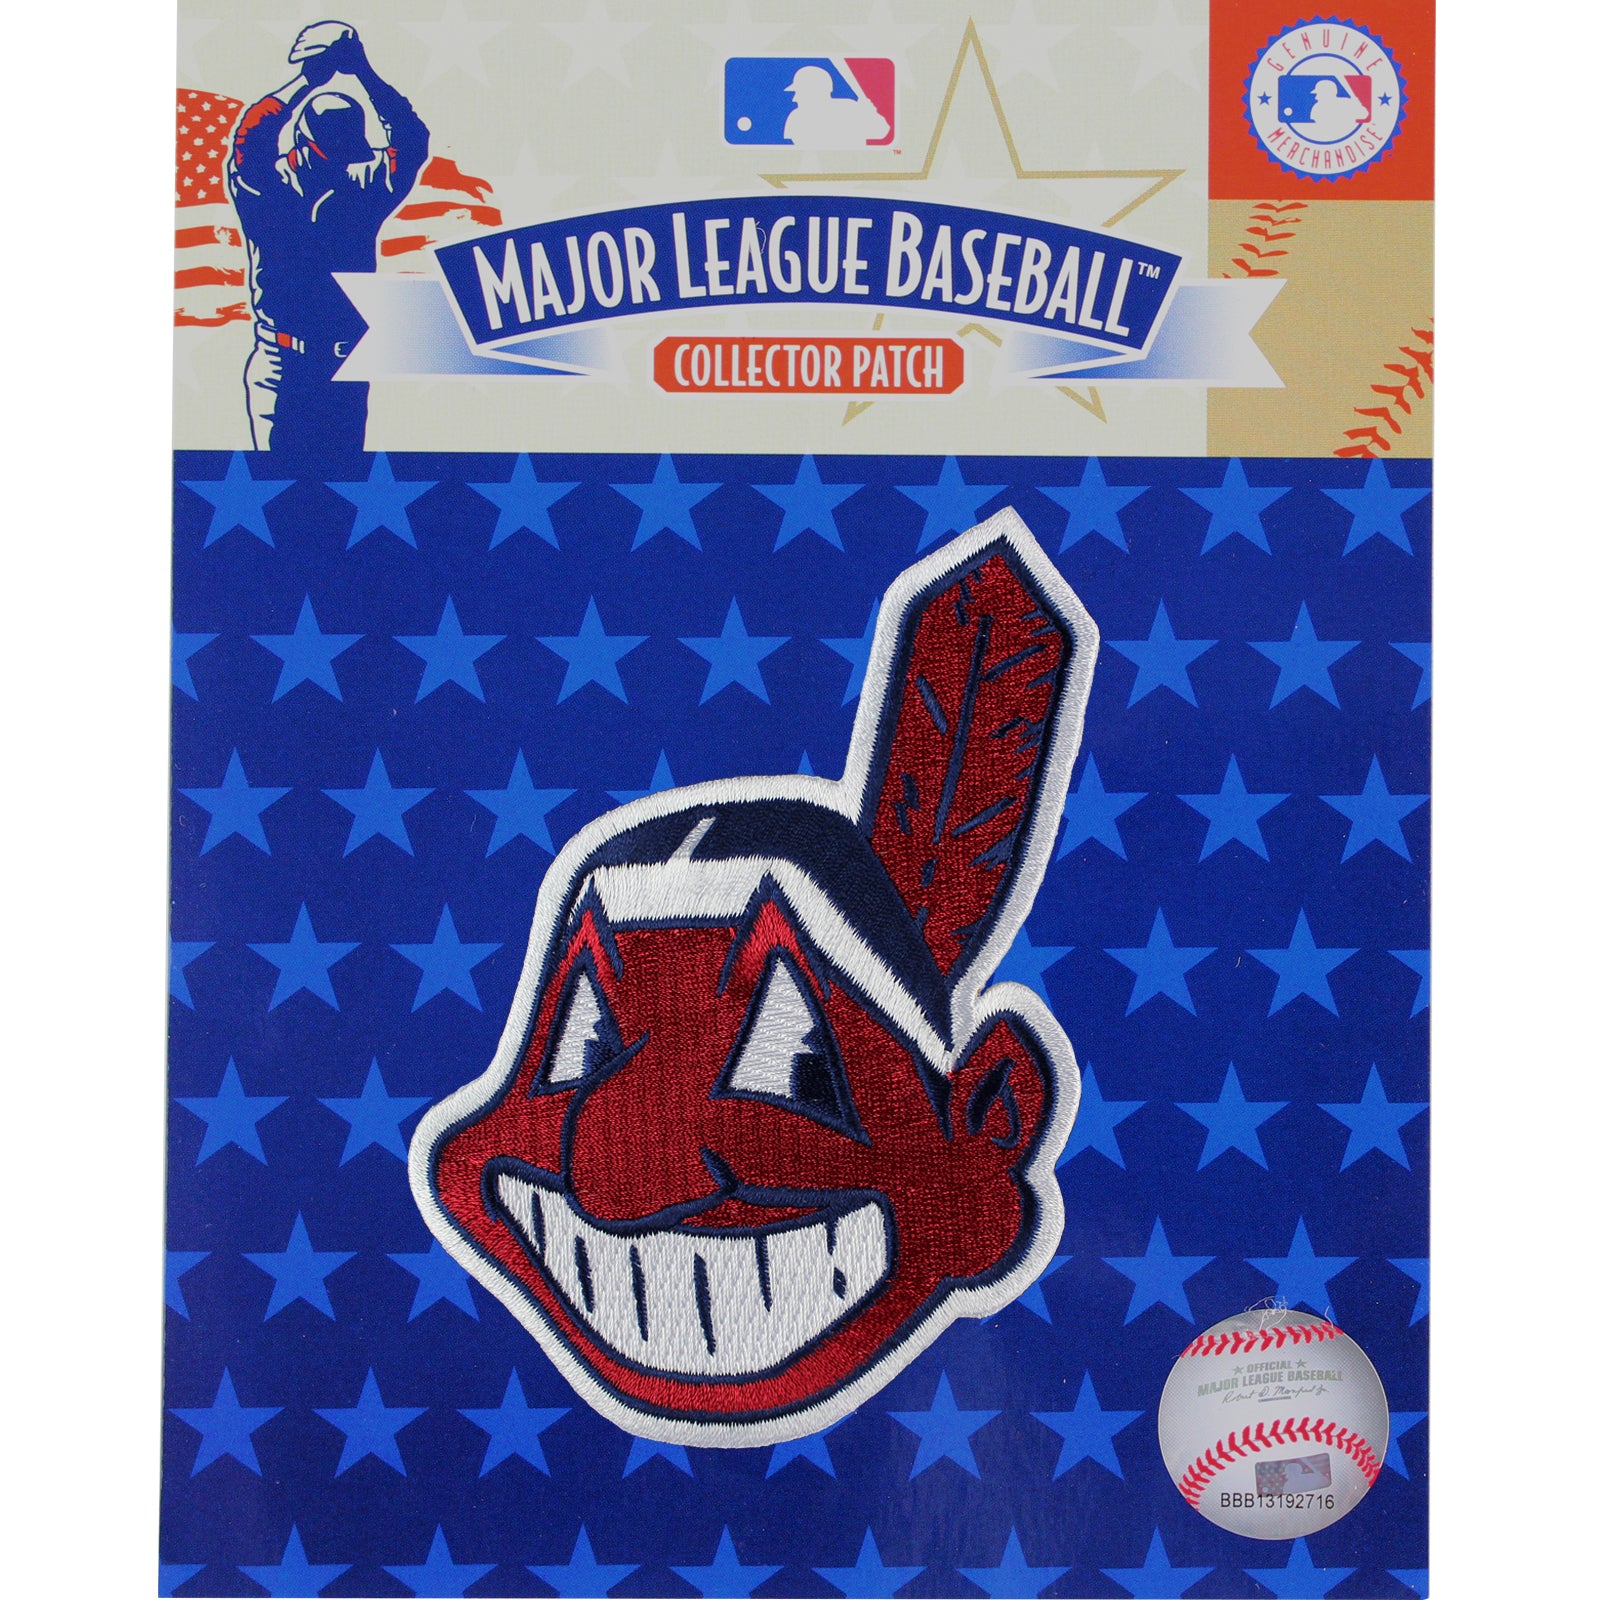 cleveland indians jersey with chief wahoo